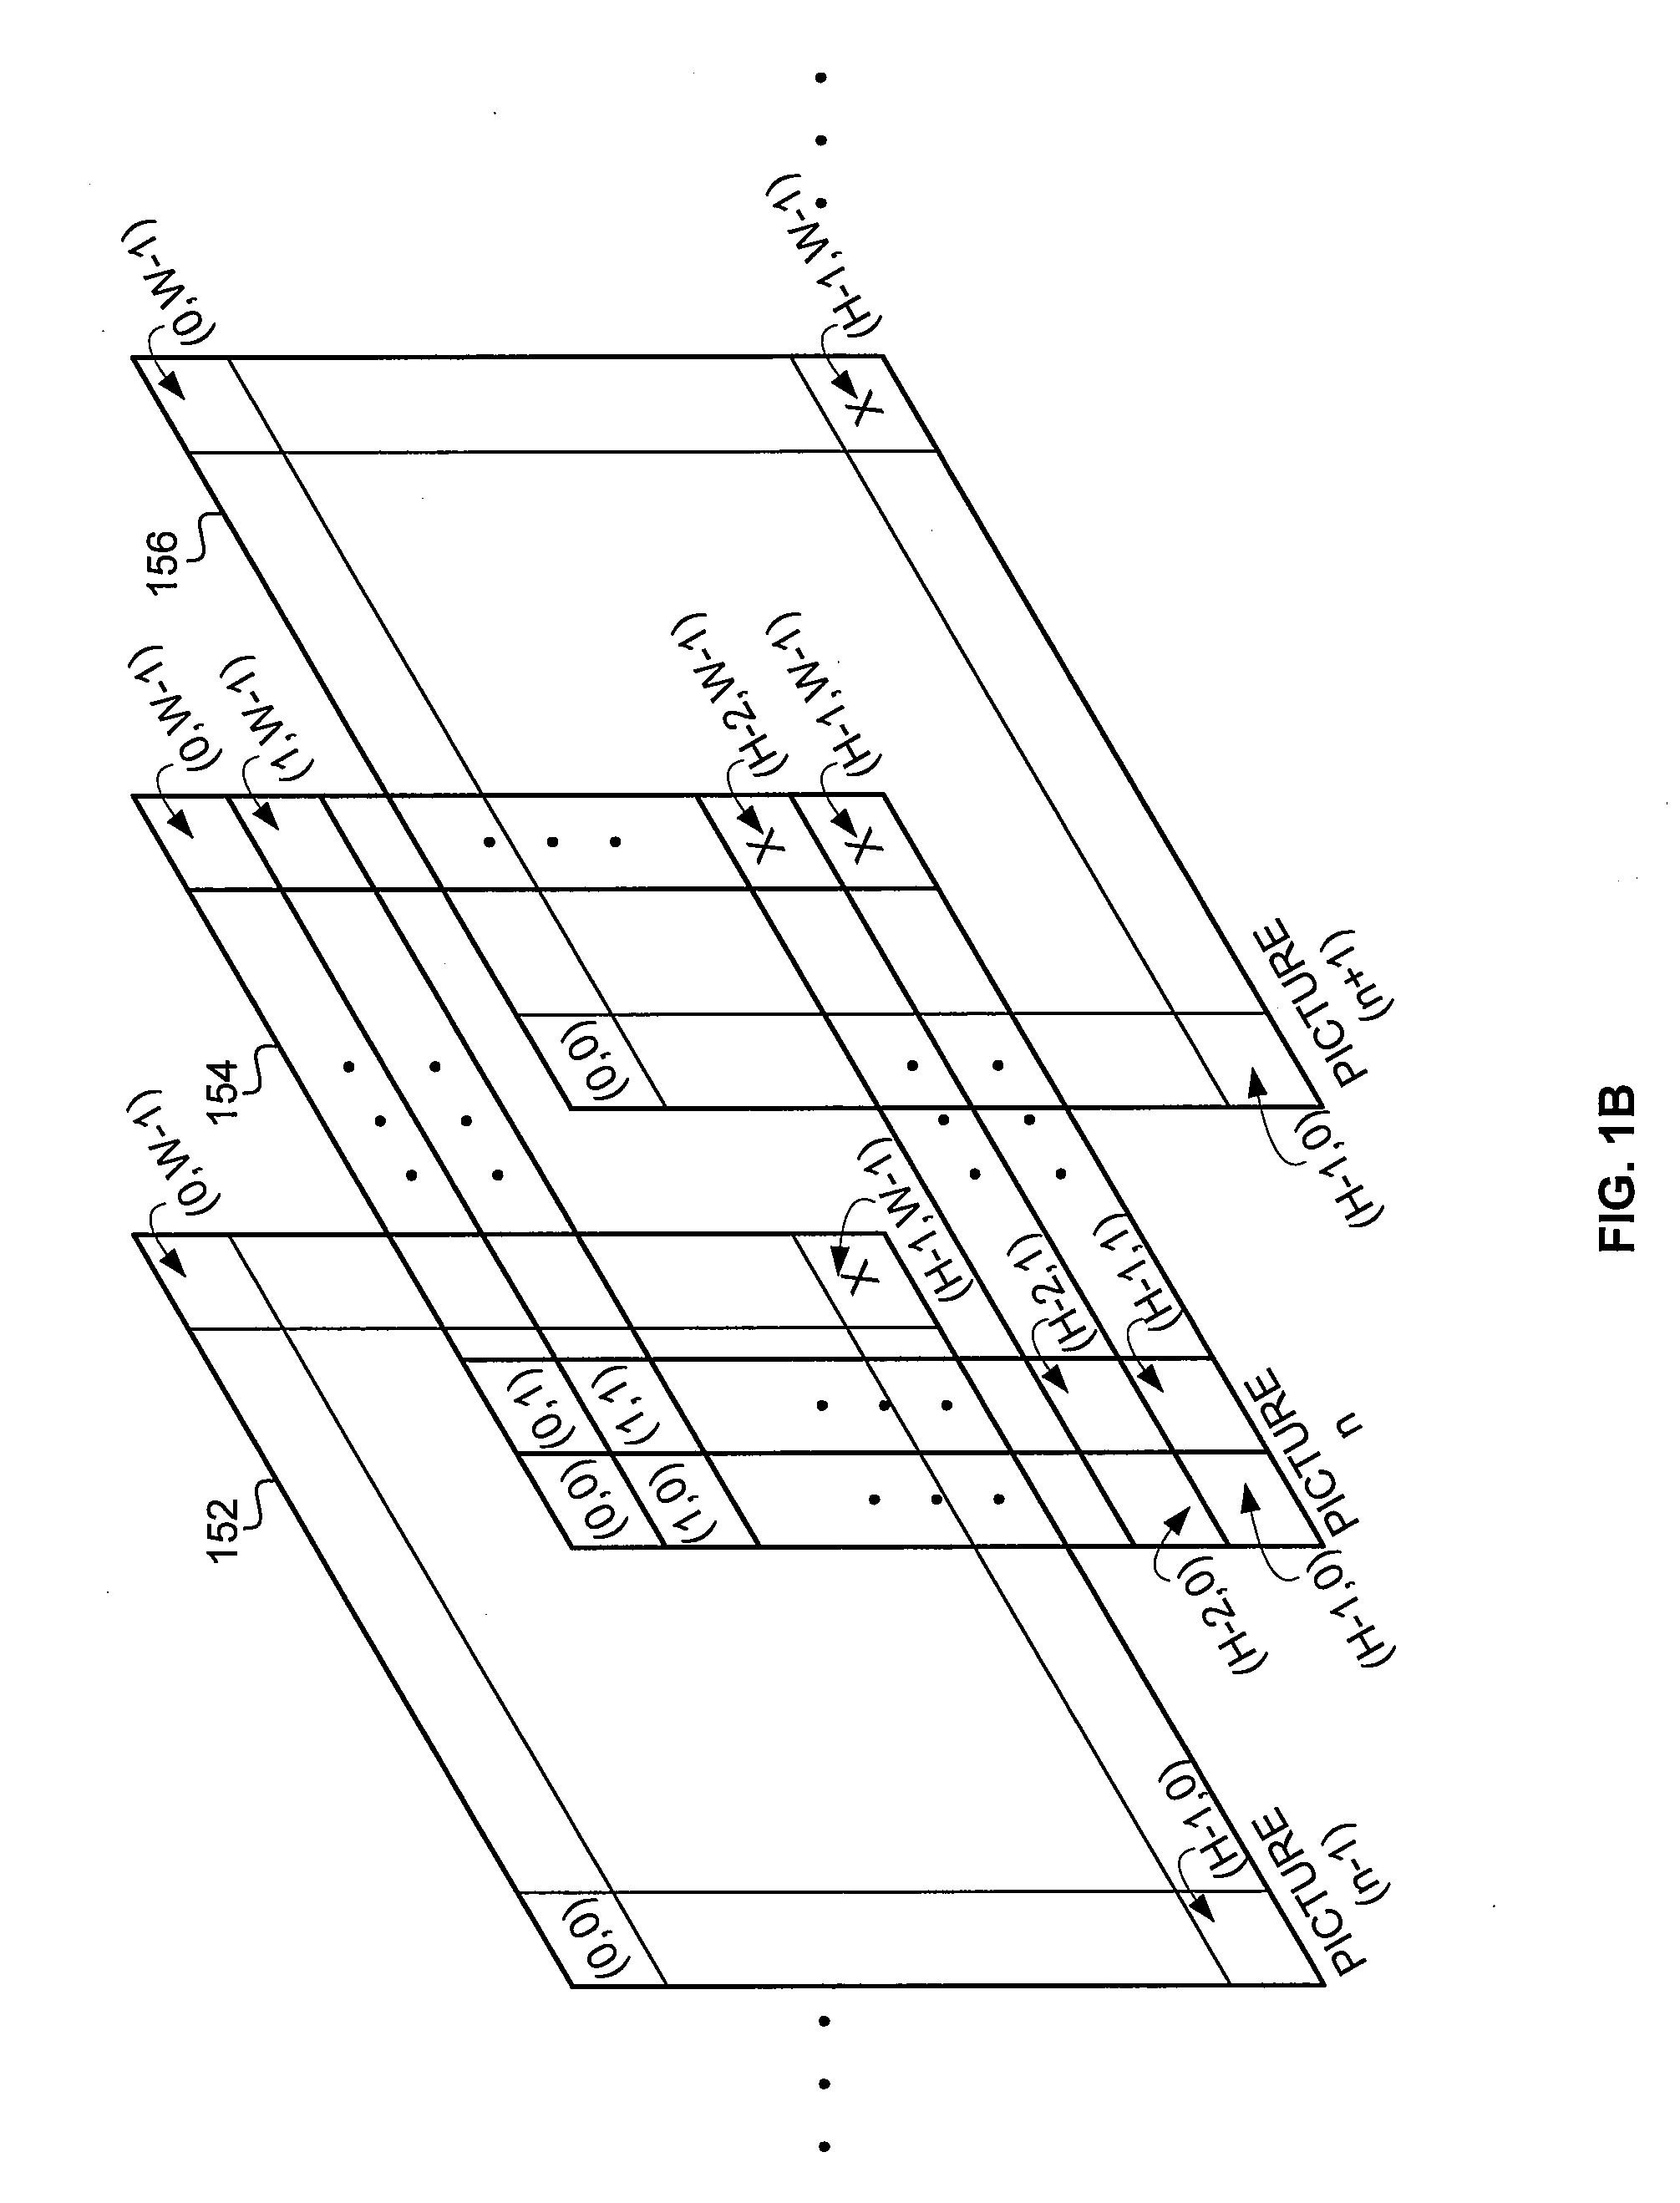 Method and System for Optical Flow Based Motion Vector Estimation for Picture Rate Up-Conversion